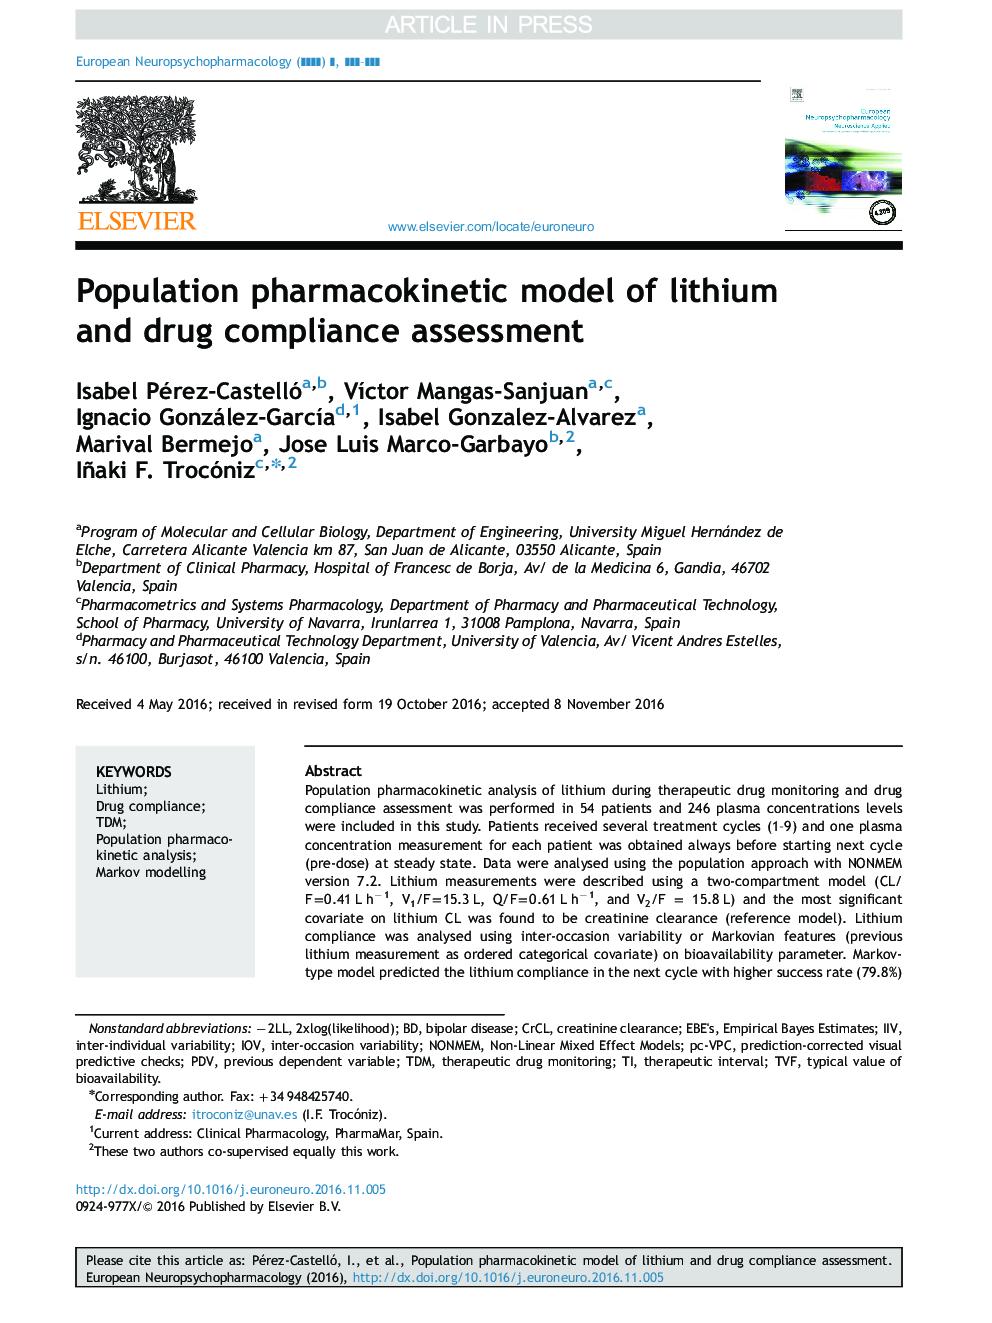 Population pharmacokinetic model of lithium and drug compliance assessment